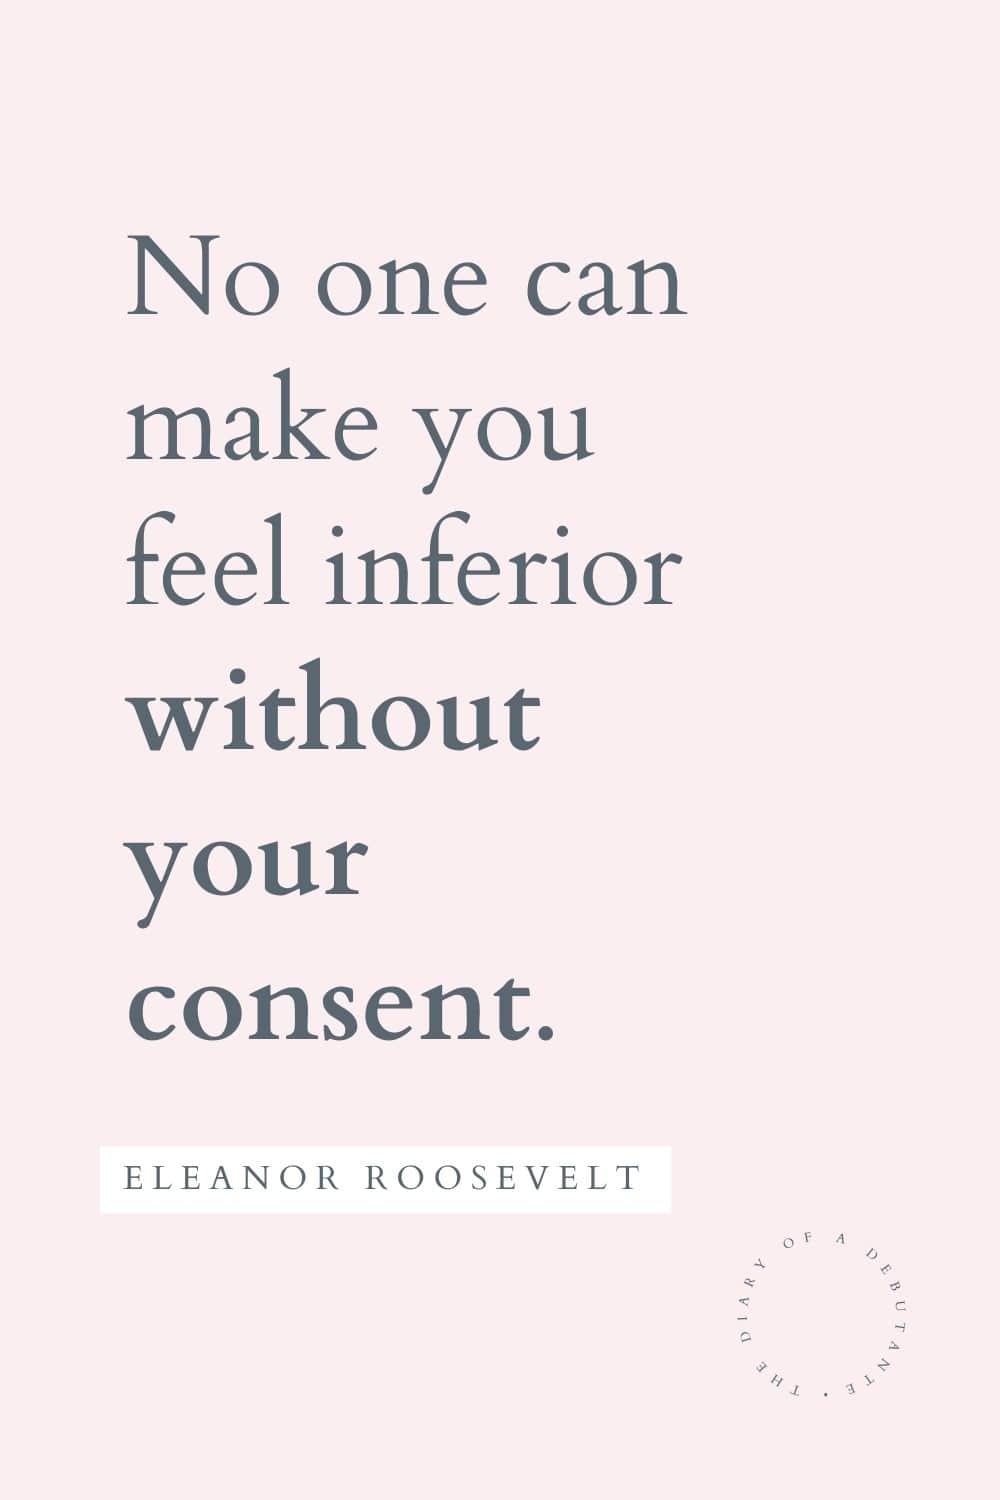 Eleanor Roosevelt nobody can make you feel inferior quote curated as part of a collection of inspirational messages for women by blogger Stephanie Ziajka on Diary of a Debutante